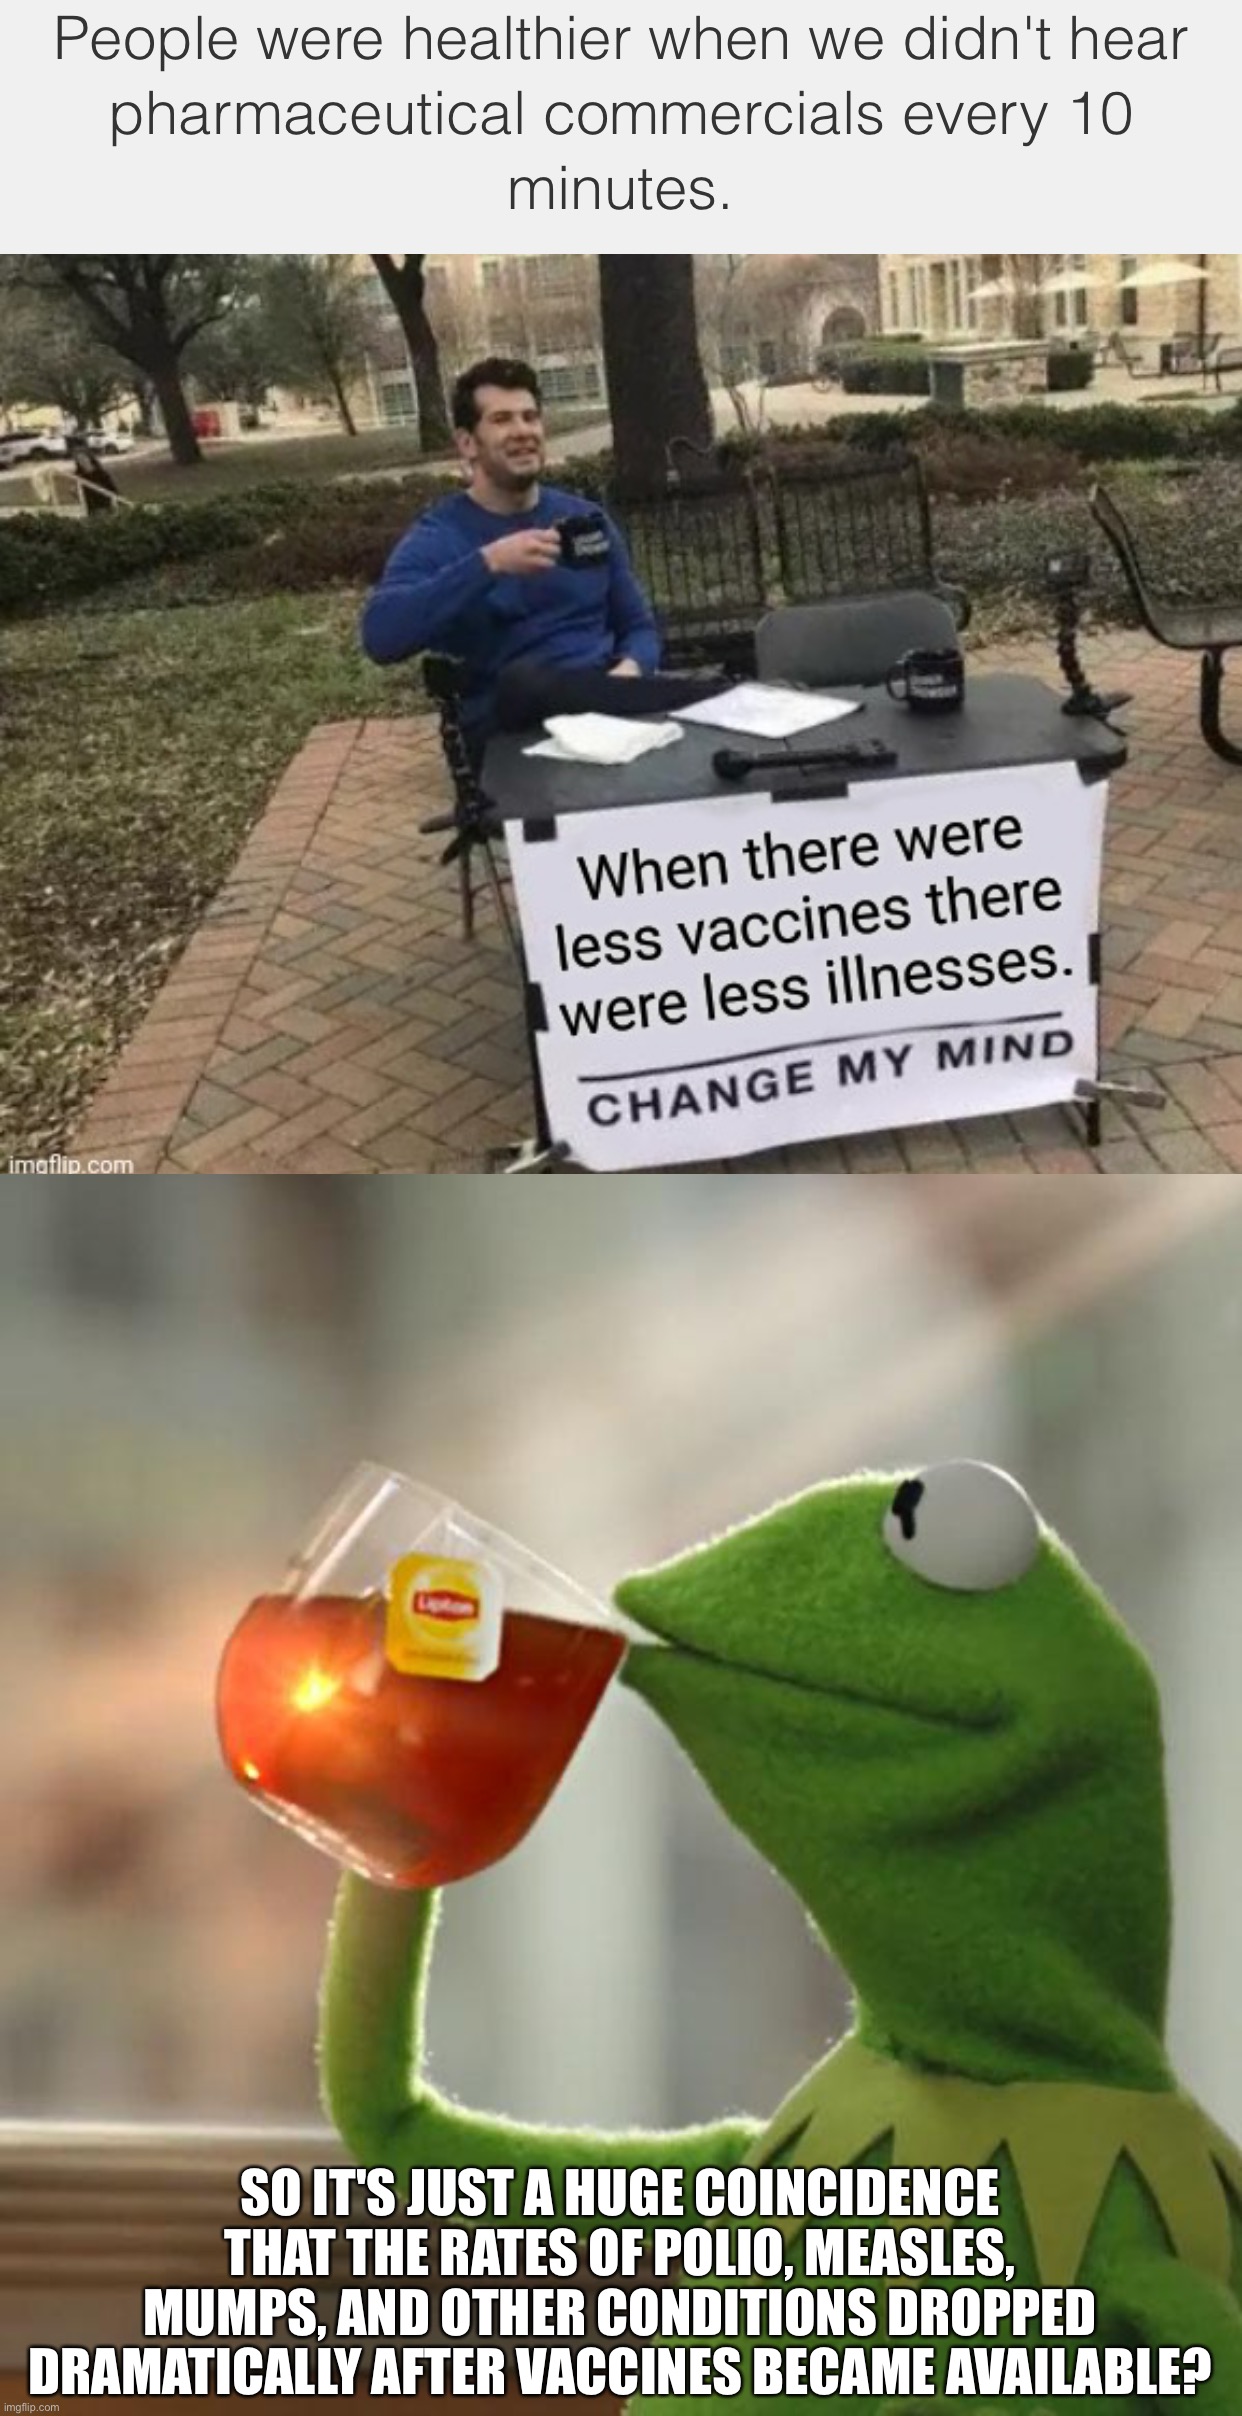 SO IT'S JUST A HUGE COINCIDENCE THAT THE RATES OF POLIO, MEASLES, MUMPS, AND OTHER CONDITIONS DROPPED DRAMATICALLY AFTER VACCINES BECAME AVAILABLE? | image tagged in memes,but that's none of my business | made w/ Imgflip meme maker